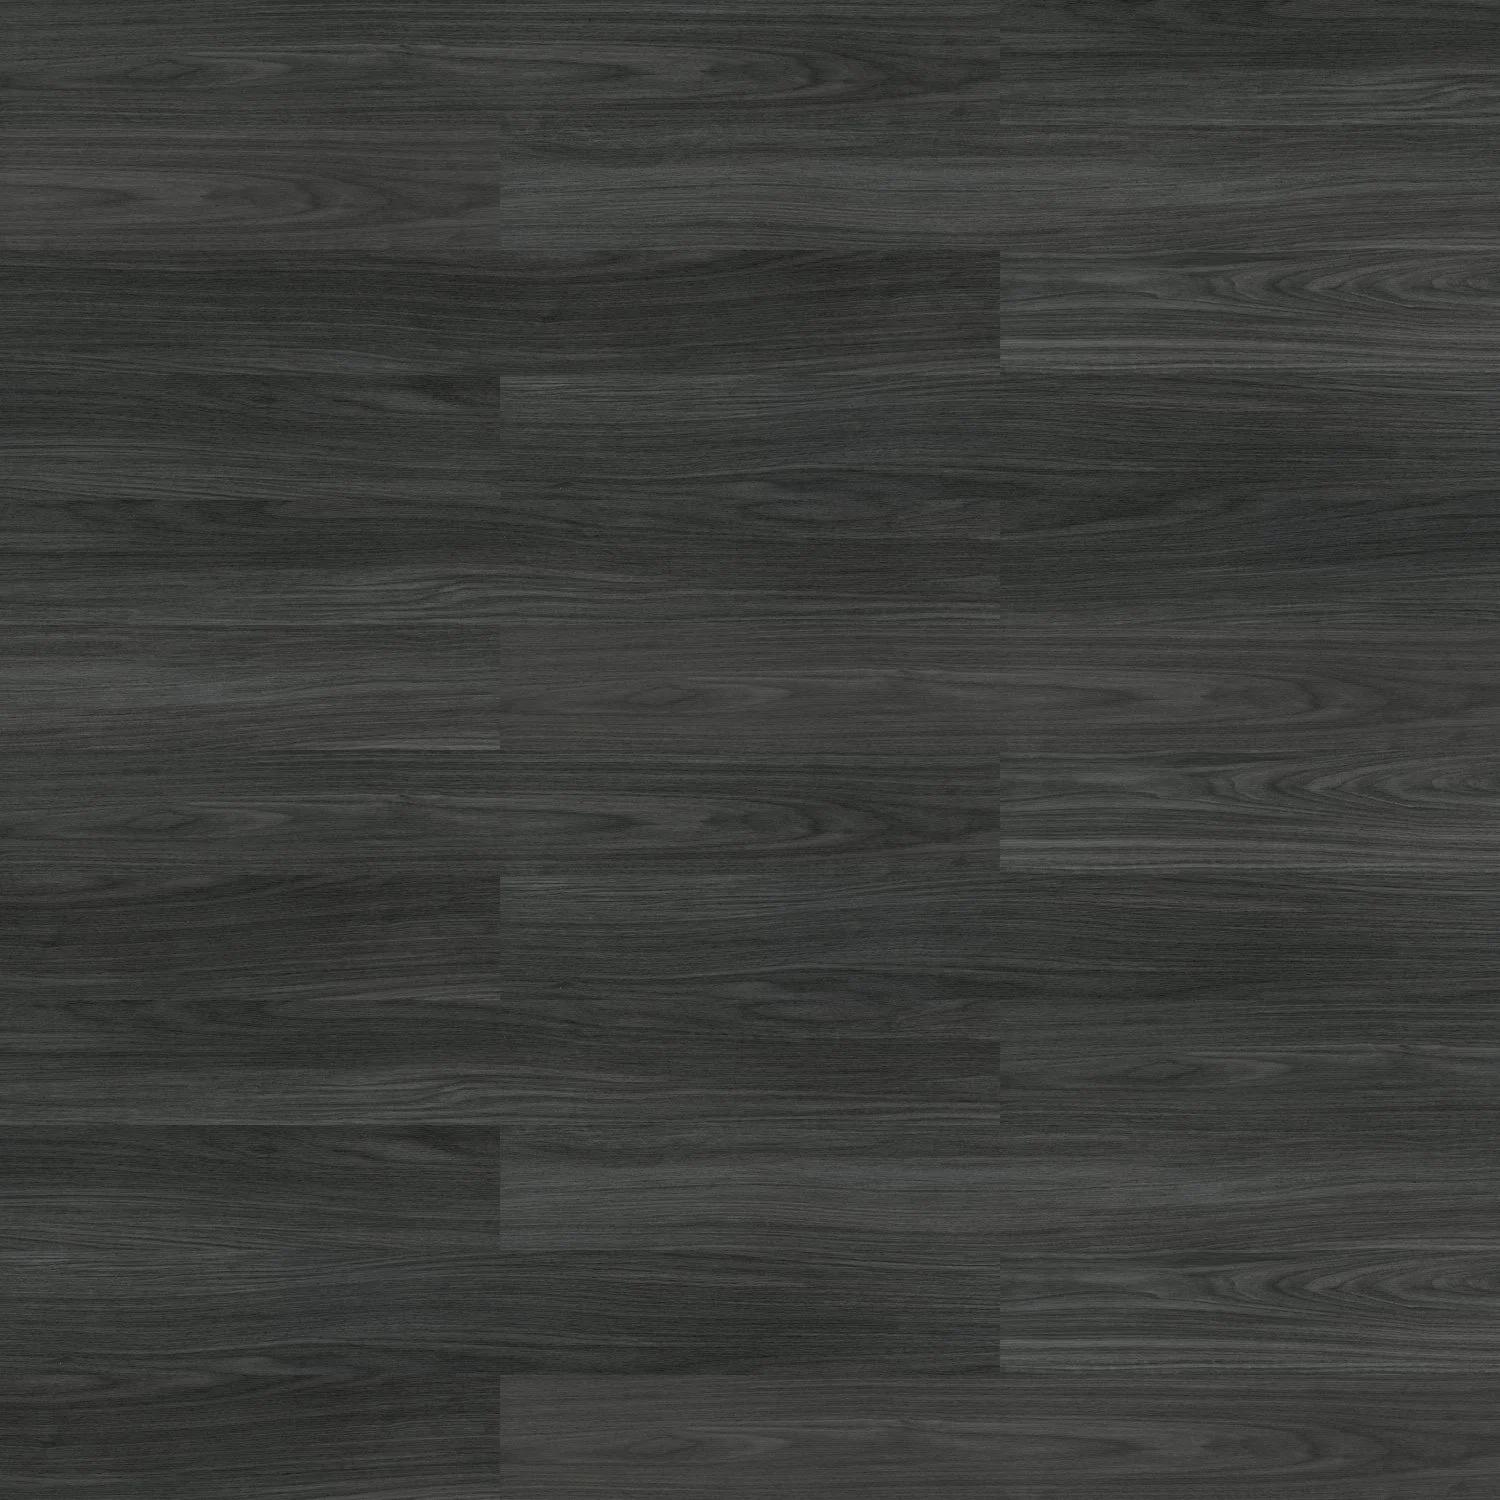 Lounge LVP Commercial Flooring Swatch